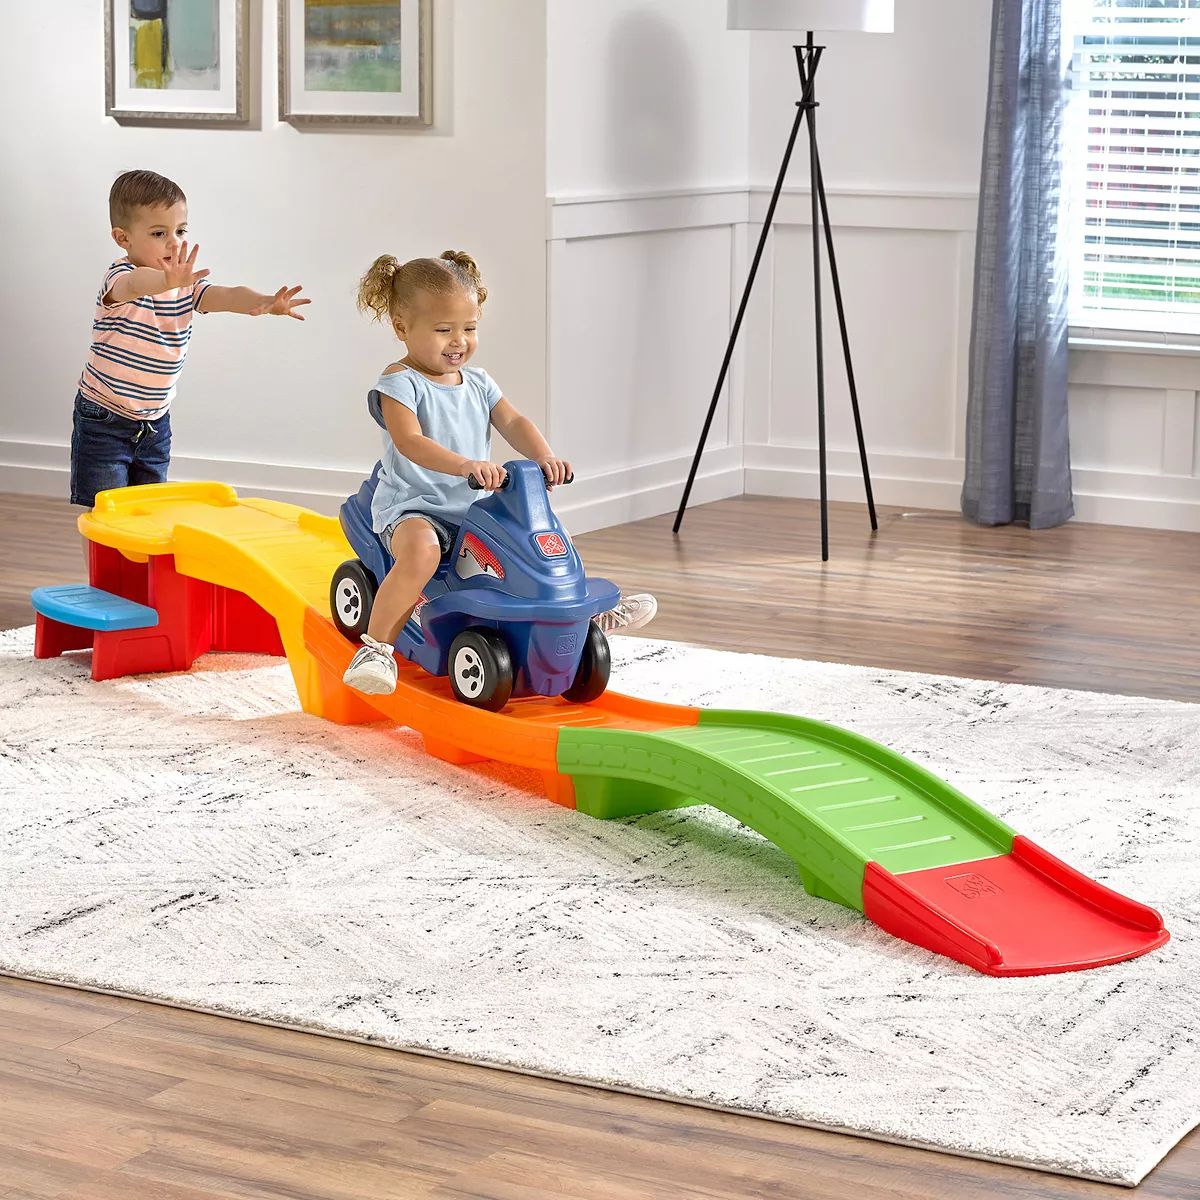 Step2 Blue Flash Up & Down Roller Coaster Ride-On Toy | Kohl's